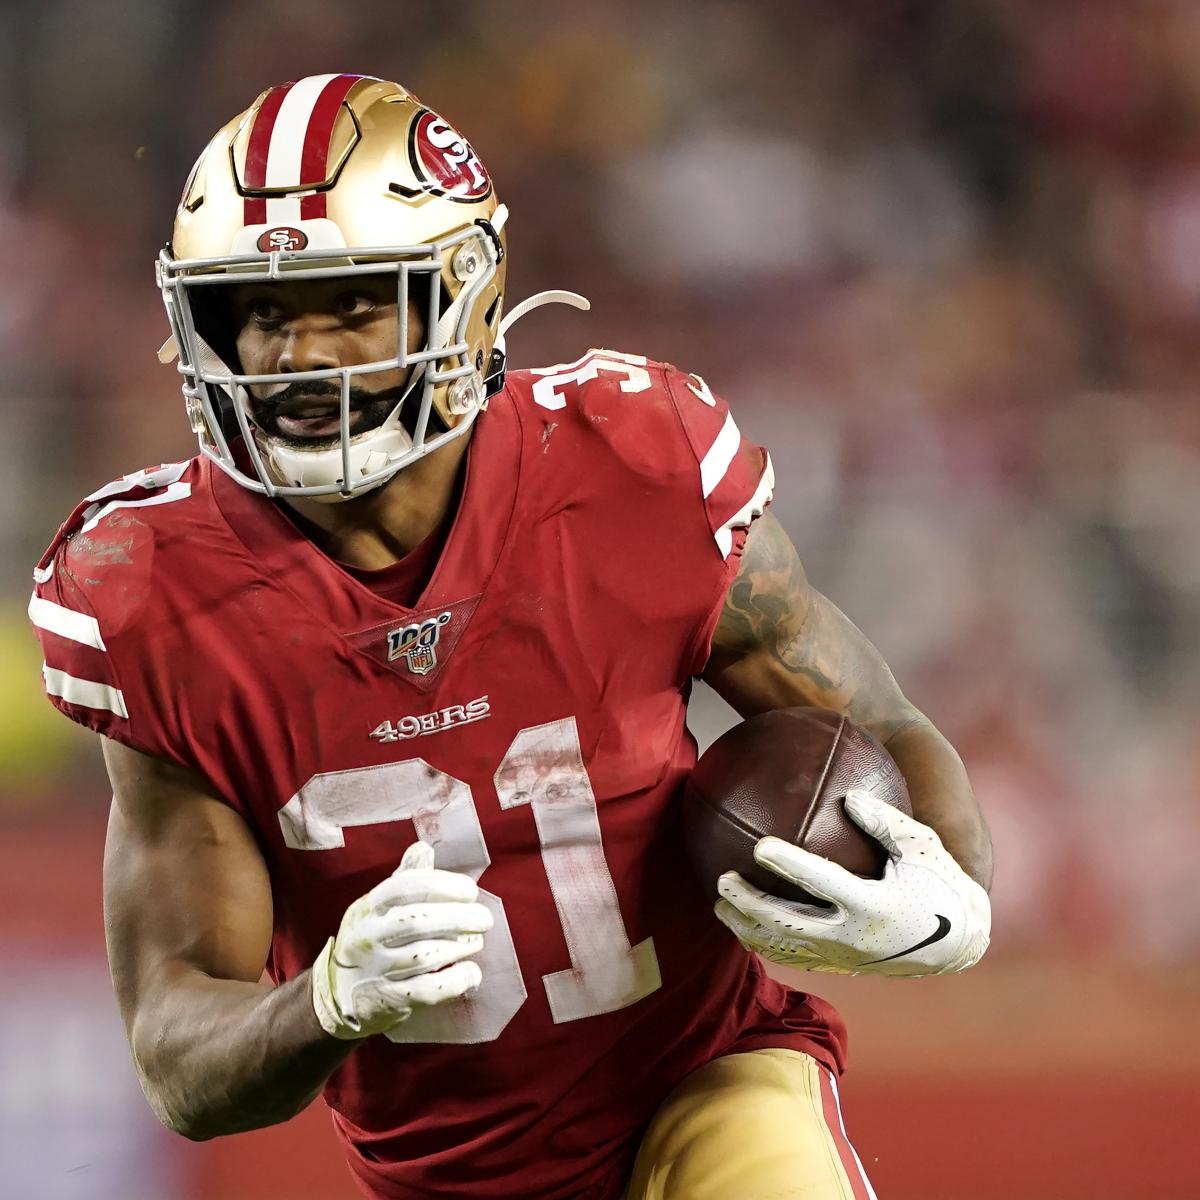 Raheem Mostert agrees new deal with the San Francisco 49ers